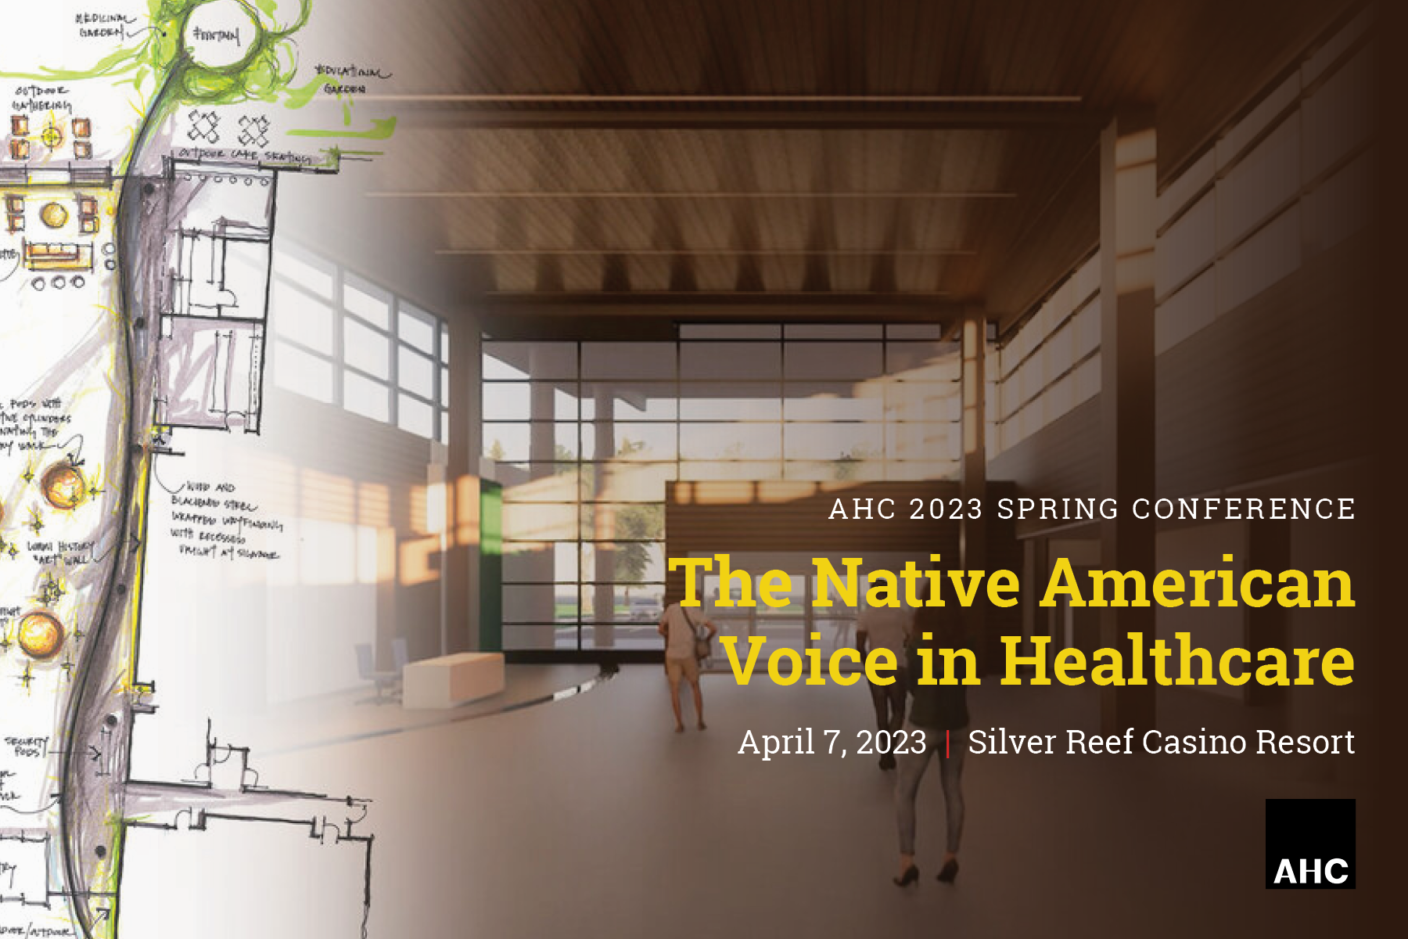 This year’s AIA AHC Spring Event includes one day of interdisciplinary presentations, design case studies, and conversations with a focus on designing for the Native American Healthcare Experience.  This session will explore how healthcare design can respond and support aspects of culture through architecture and planning.